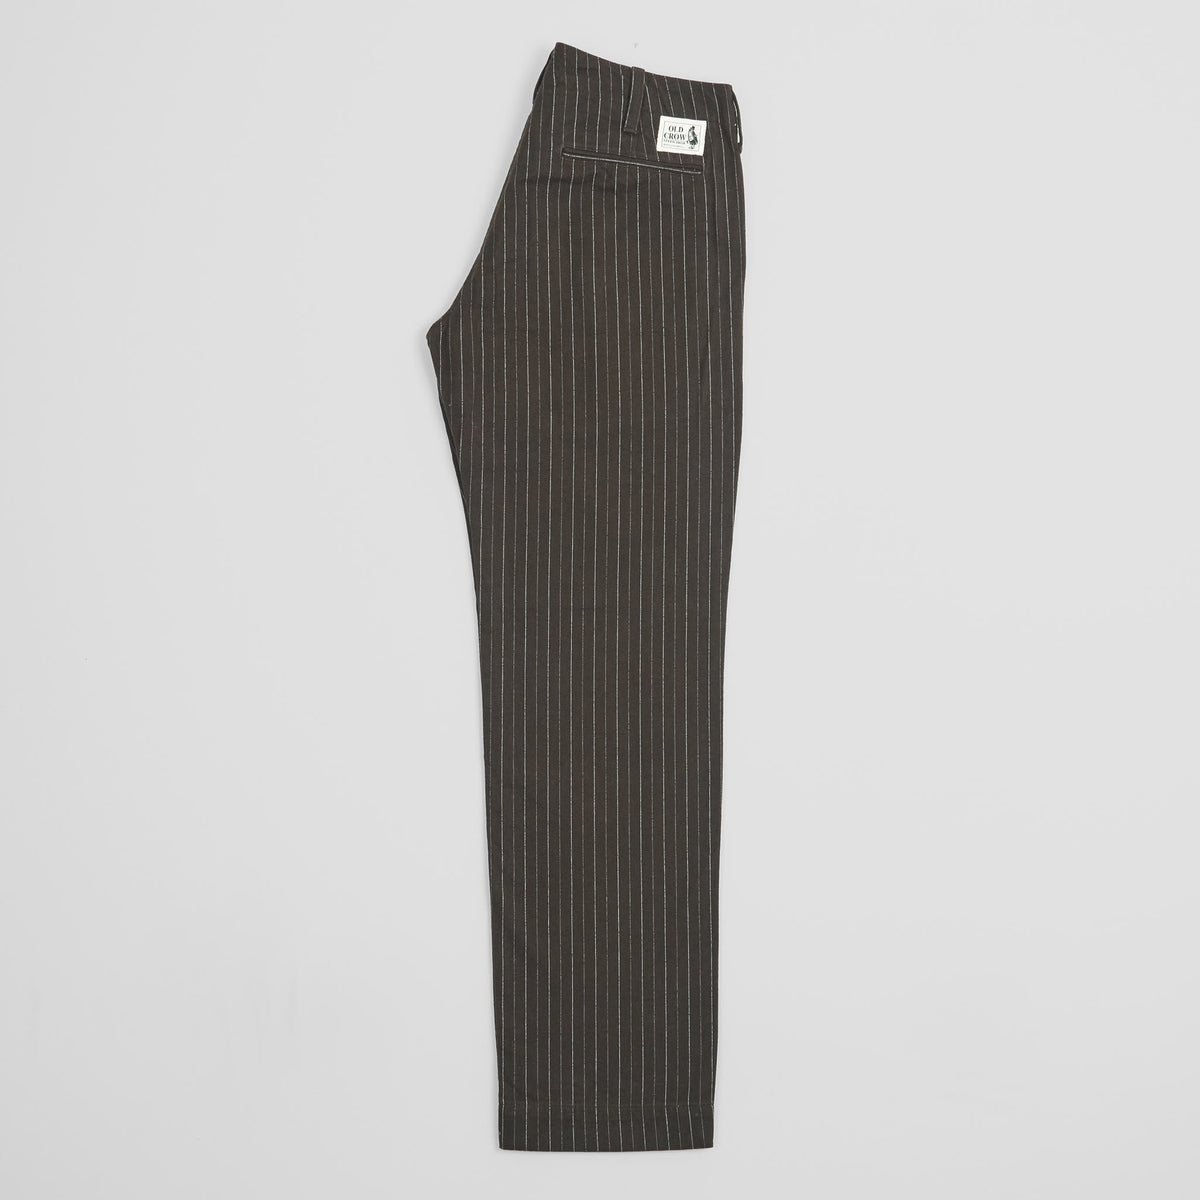 Old Crow Speed Shop by Glad Hand &amp; Co. Vintage Striped Pants